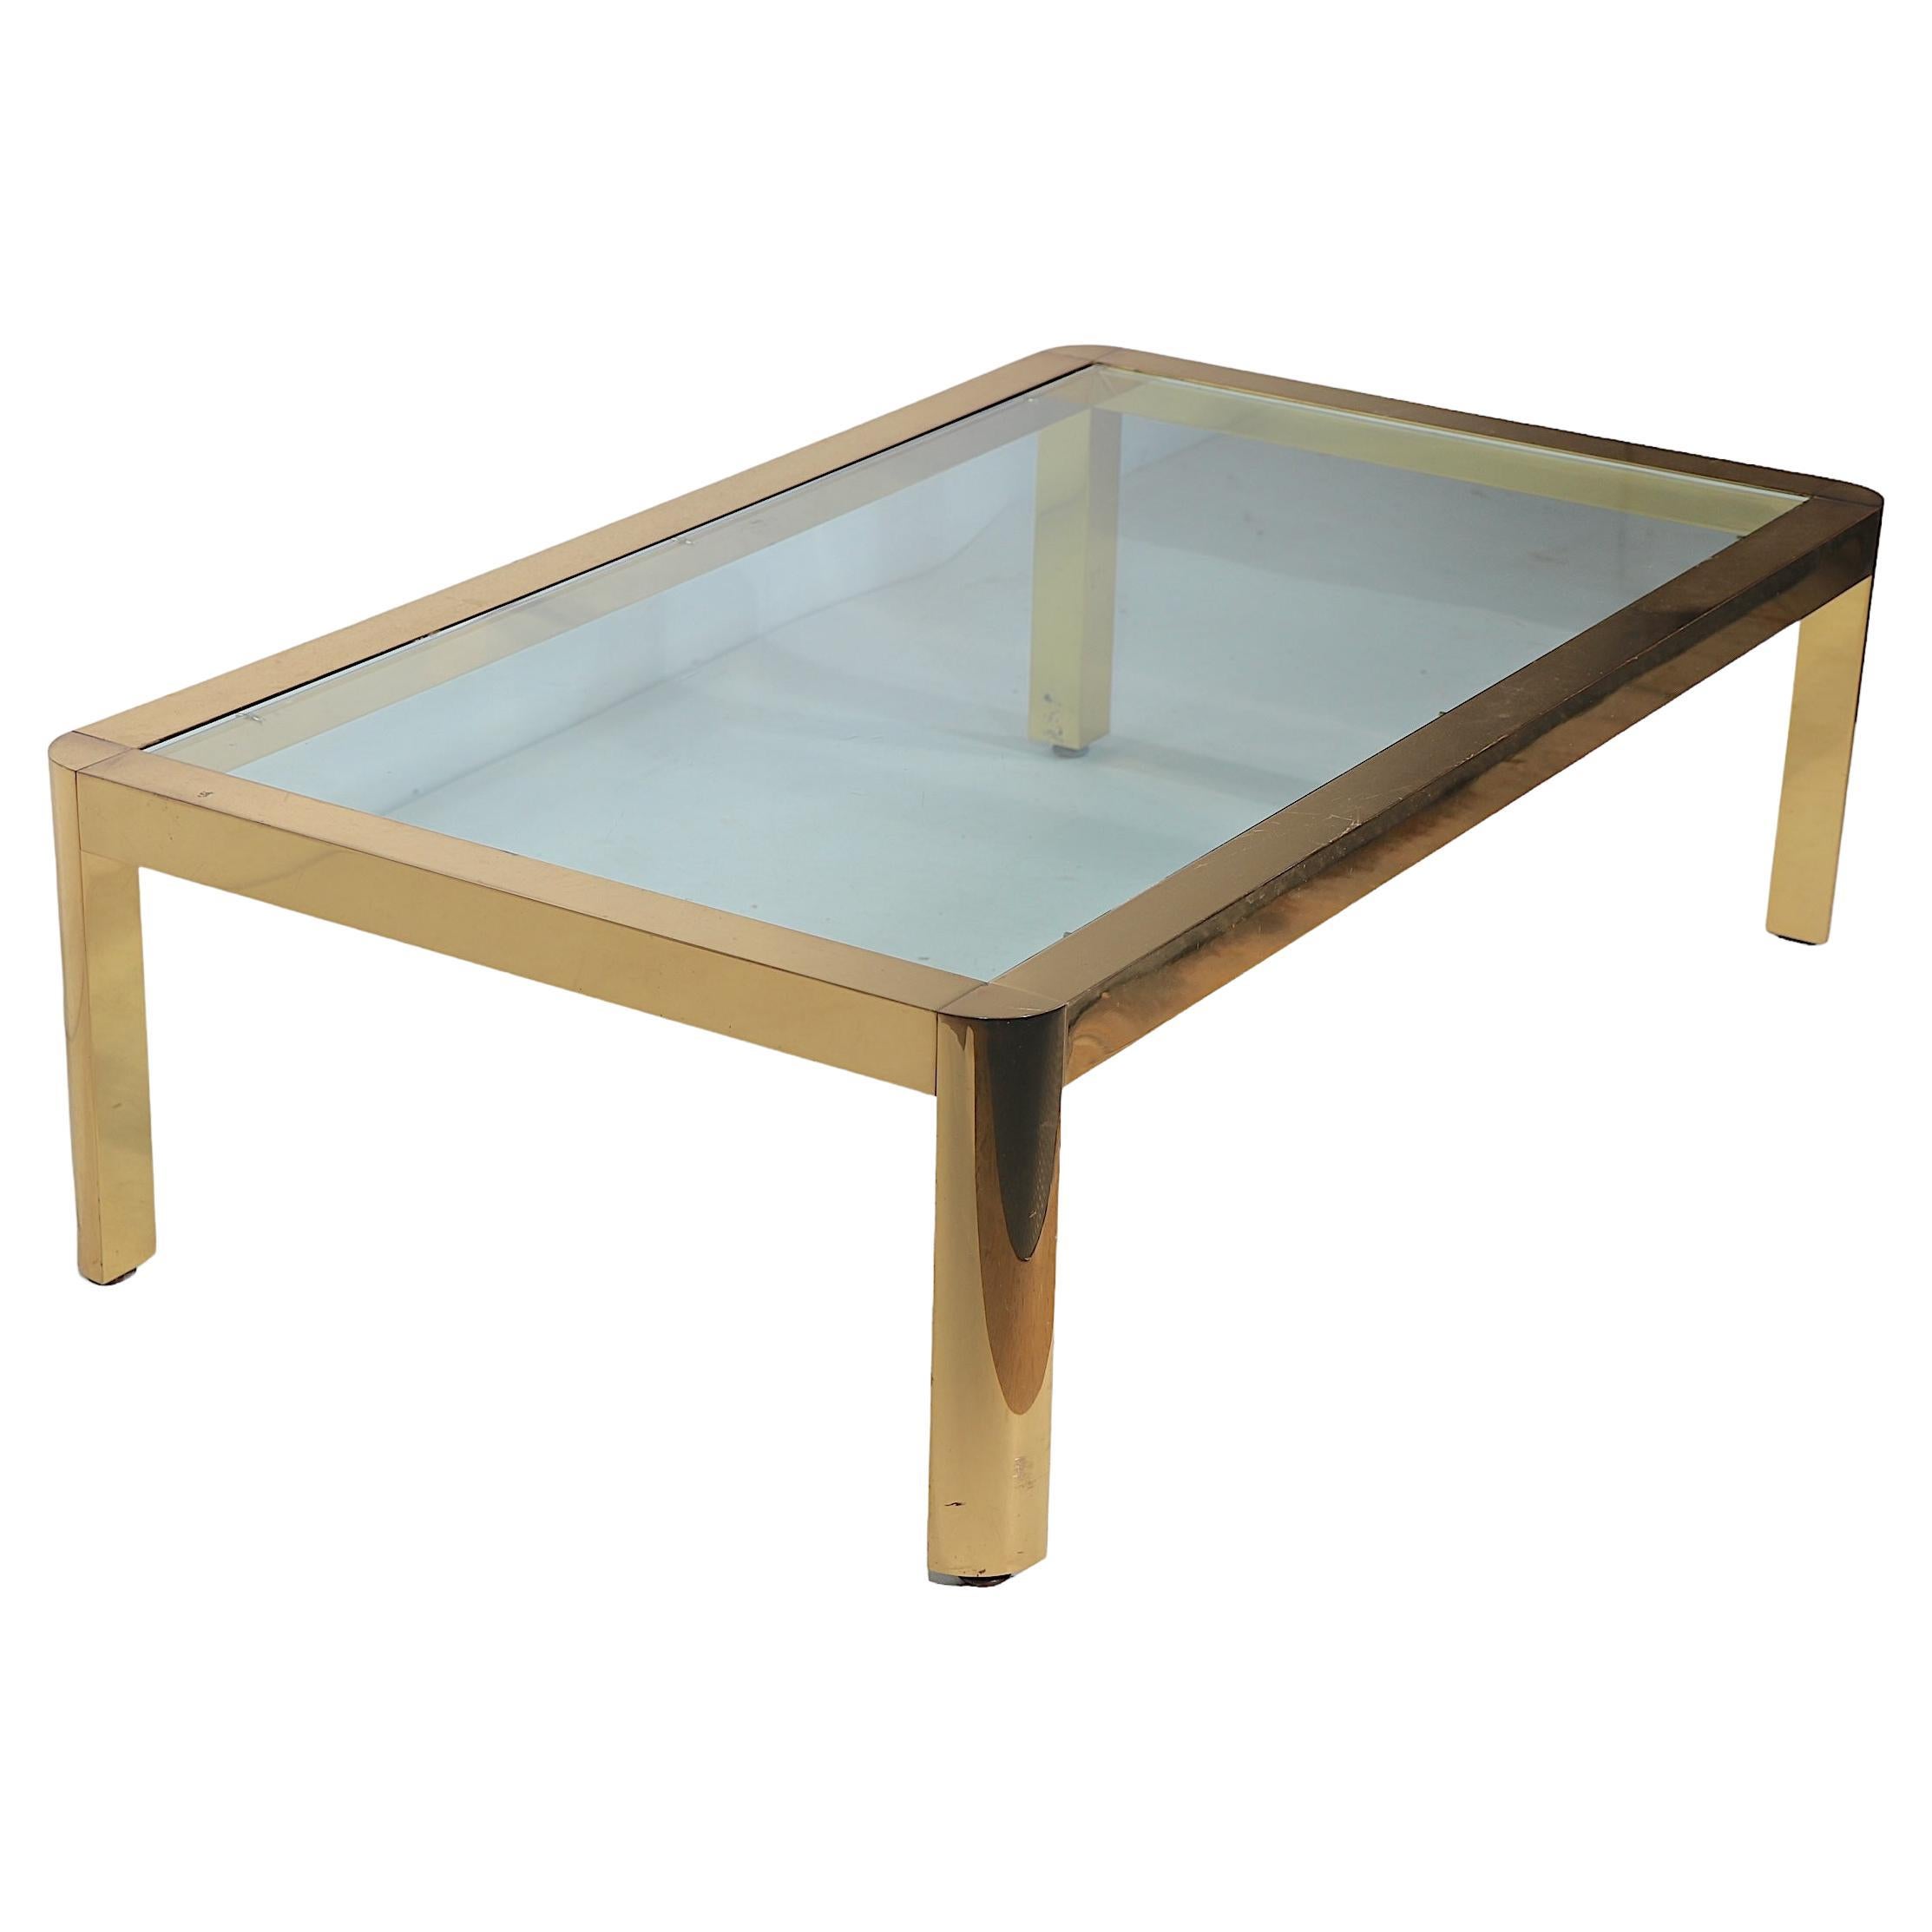 Postmodern Hollywood Regency Brass and Glass Coffee Table Made in Italy c 1970's For Sale